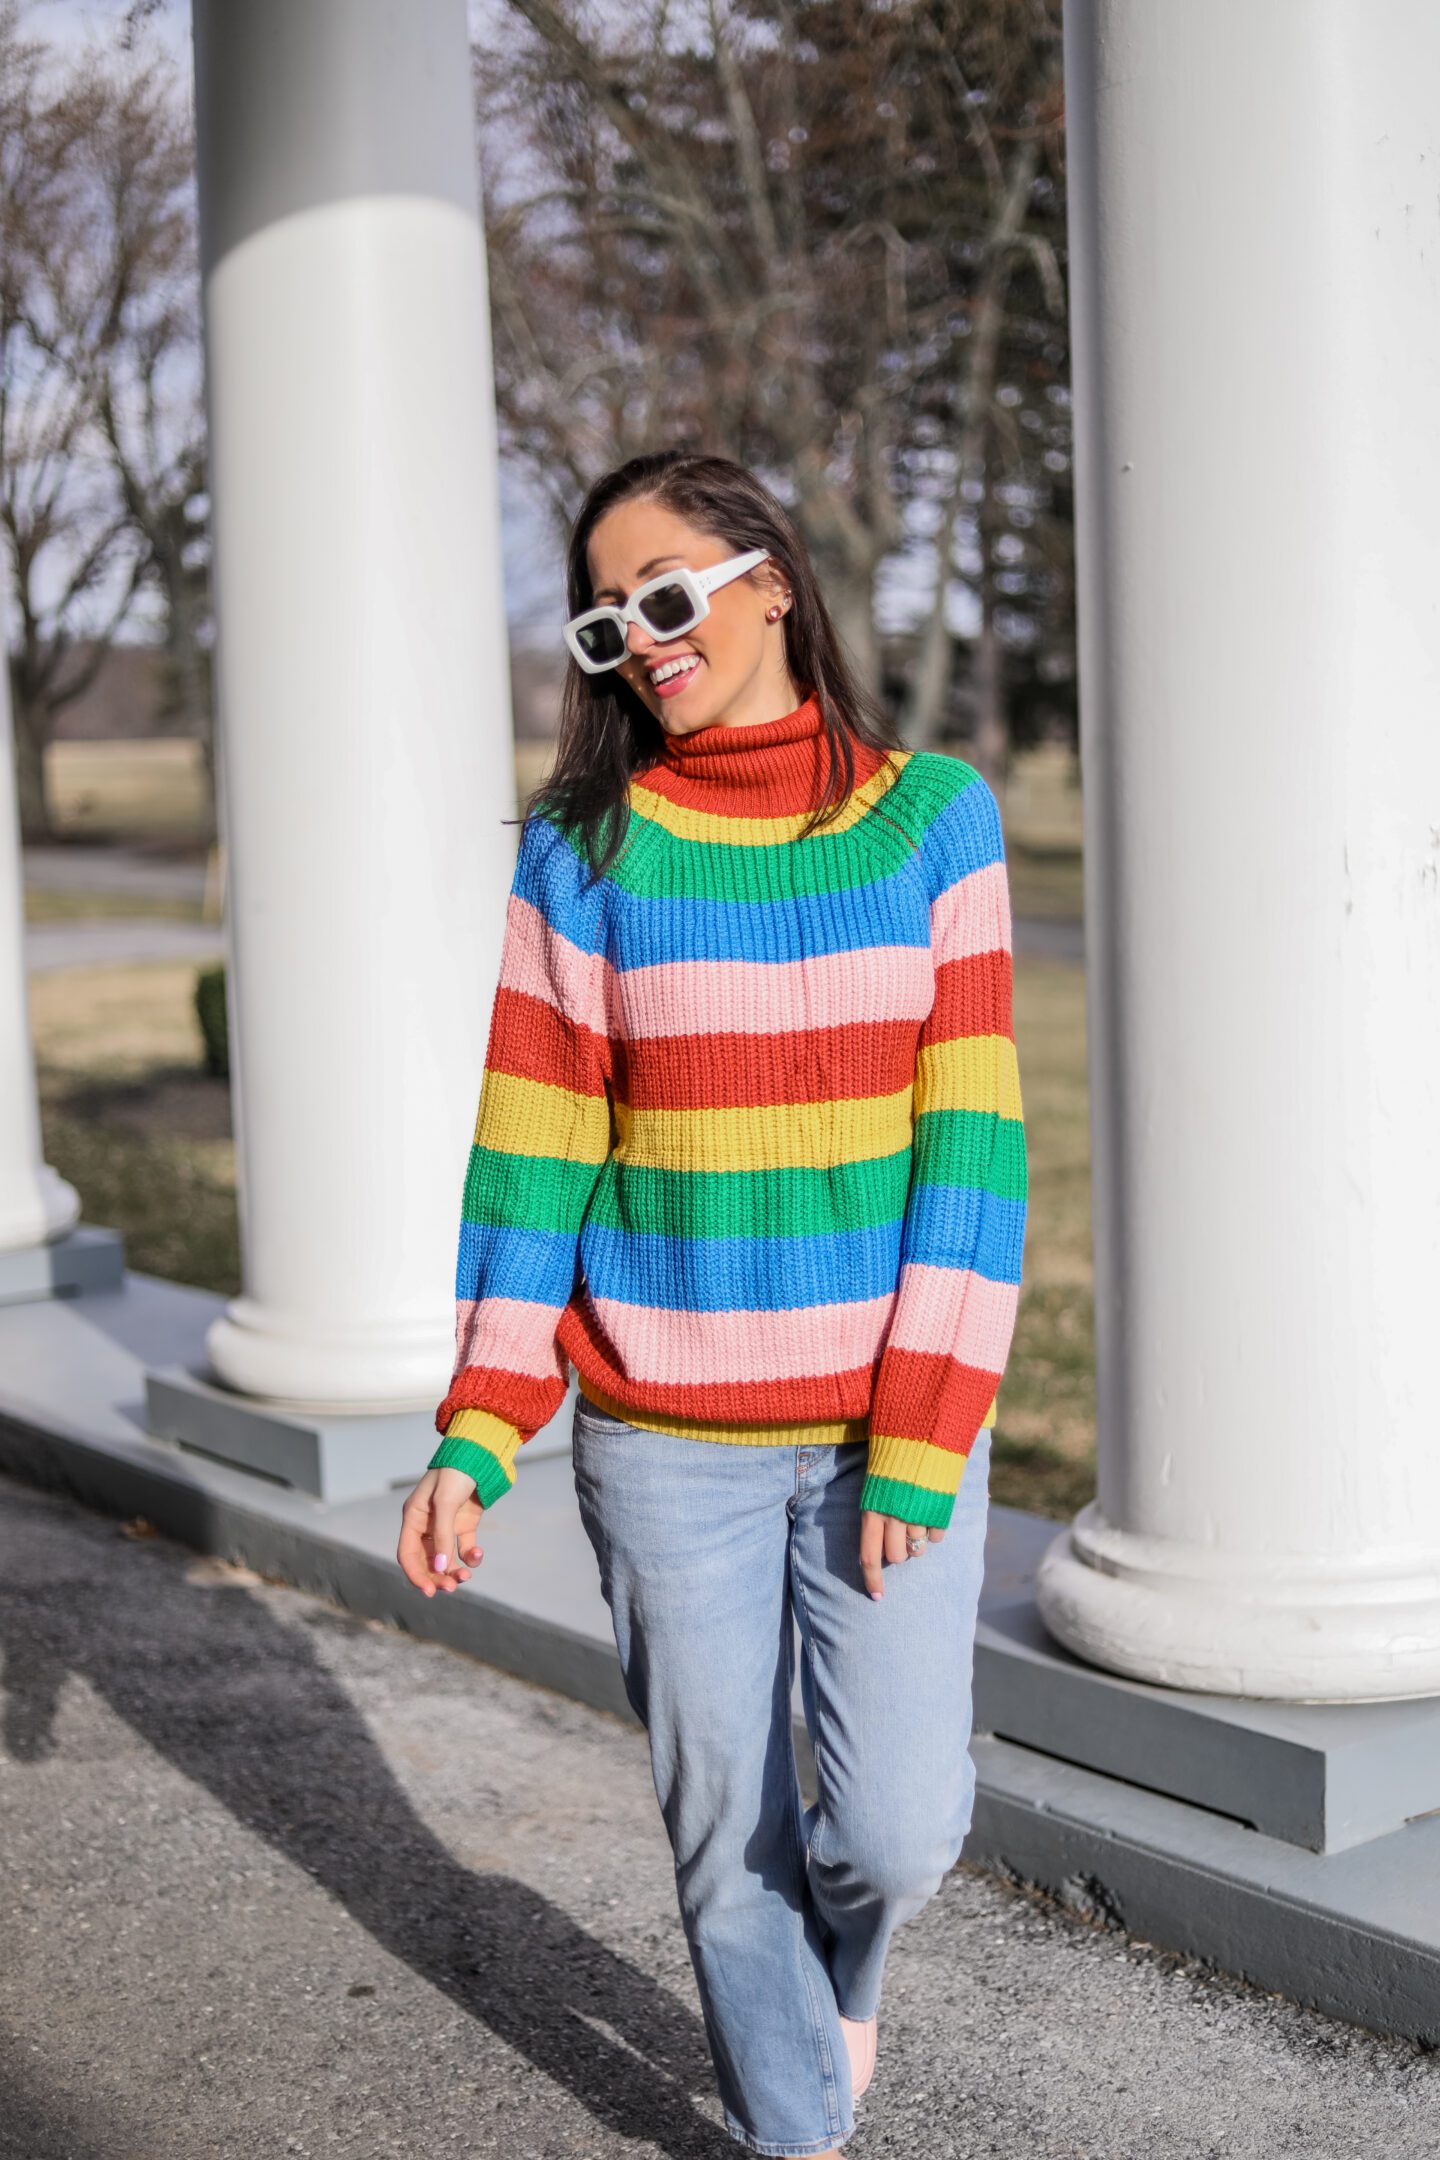 How to wear a sweater in spring - Transitional outfit idea on Coming Up Roses